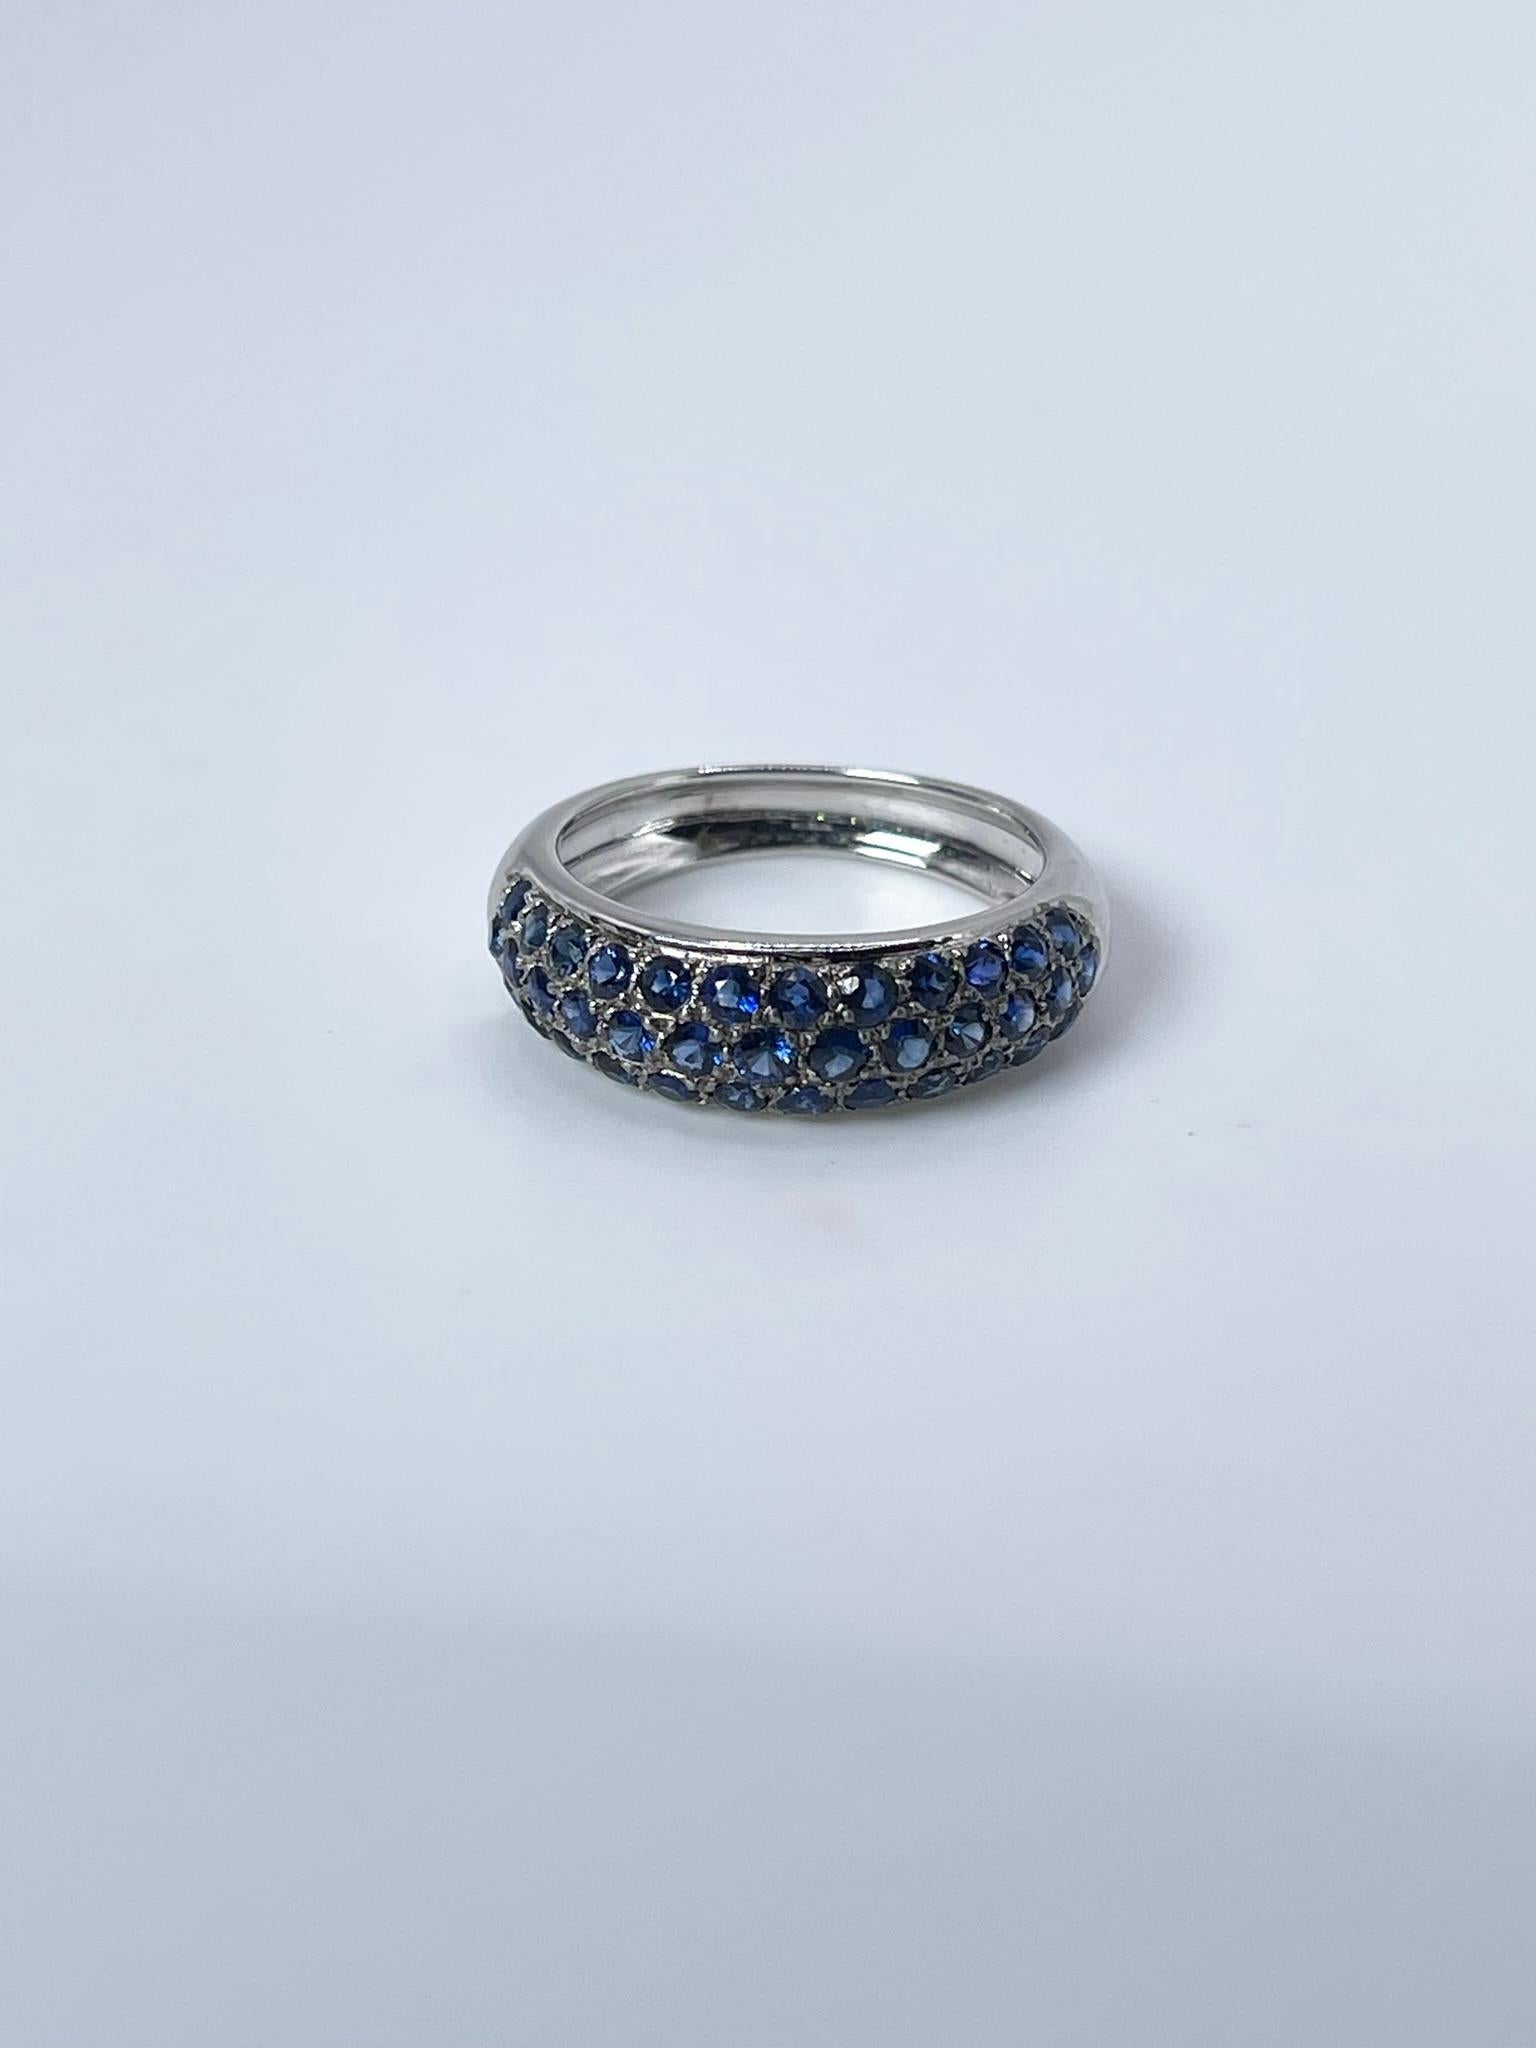 Pave set diamond ring made with sapphires in 18KT white gold.
ITEM: RTF200-00045
GRAM WEIGHT: 4.17gr
GOLD: 18KT white gold
NATURAL SAPPHIRE
Cut: Round
Color: Blue
Clarity: Moderately Included
Carat:1.12ct
SIZE: 7 (can be re-sized)


WHAT YOU GET AT